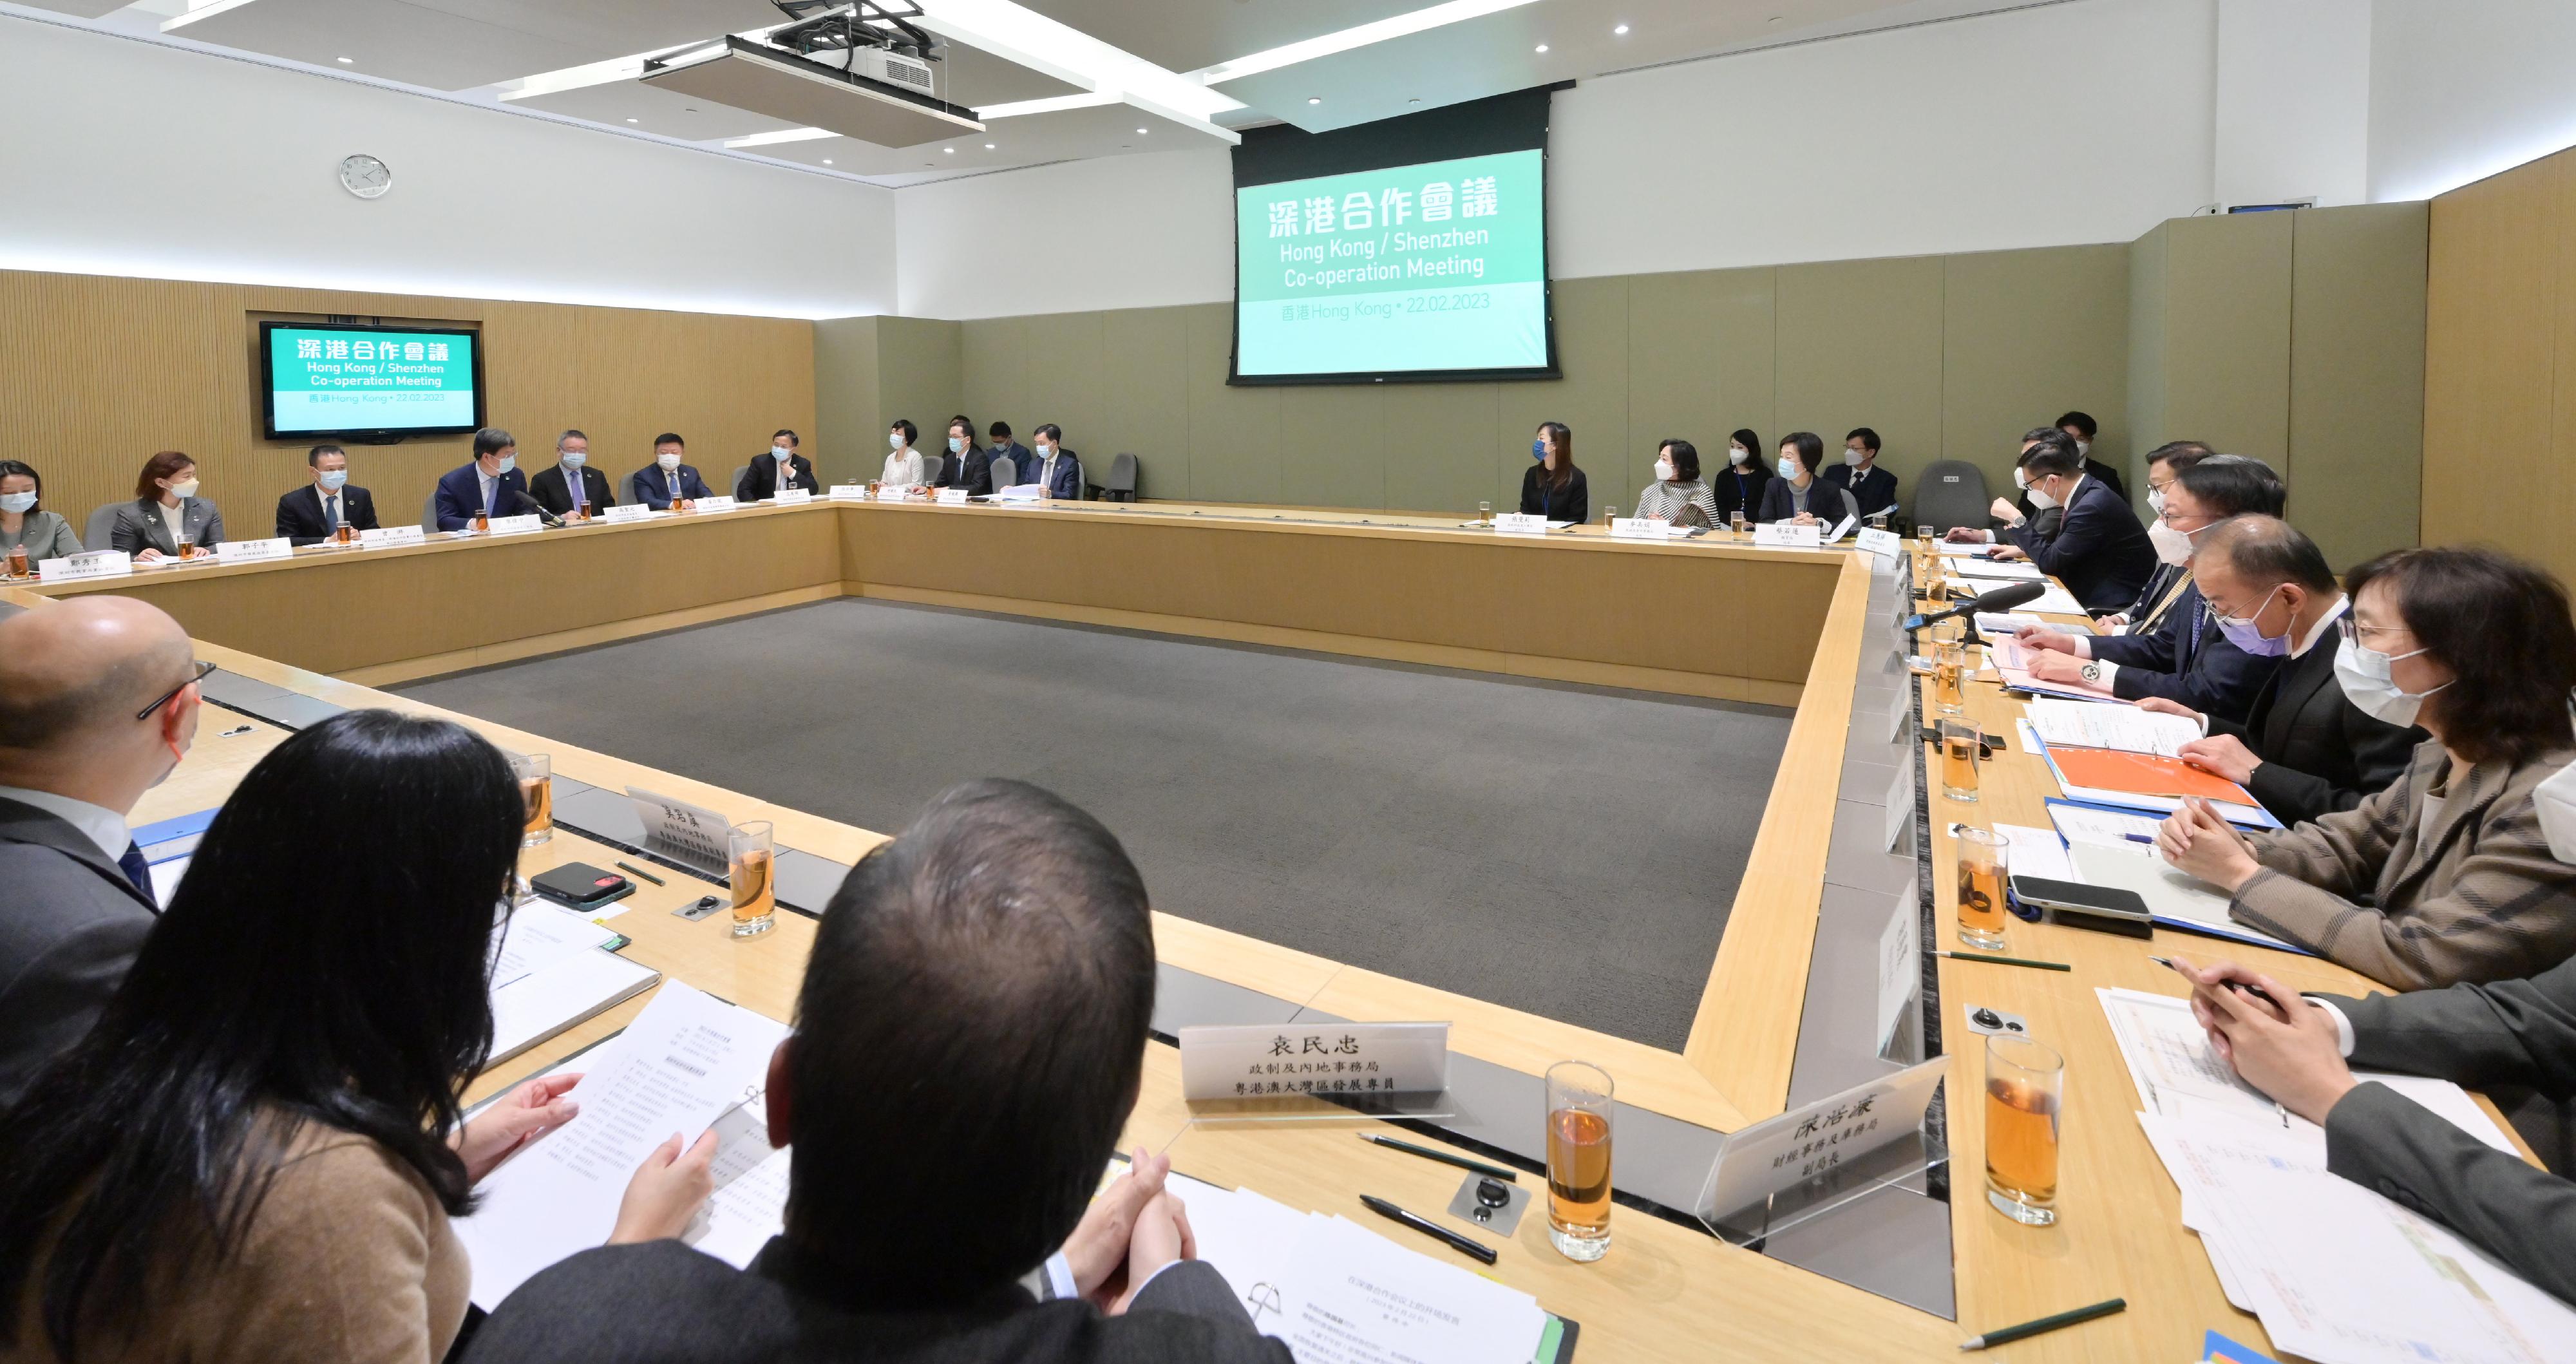 The Chief Secretary for Administration of the Government of the Hong Kong Special Administrative Region, Mr Chan Kwok-ki (third right), and the Mayor of the Shenzhen Municipal Government, Mr Qin Weizhong (fourth left), co-chaired the 2023 Hong Kong/Shenzhen Co-operation Meeting in Hong Kong today (February 22).